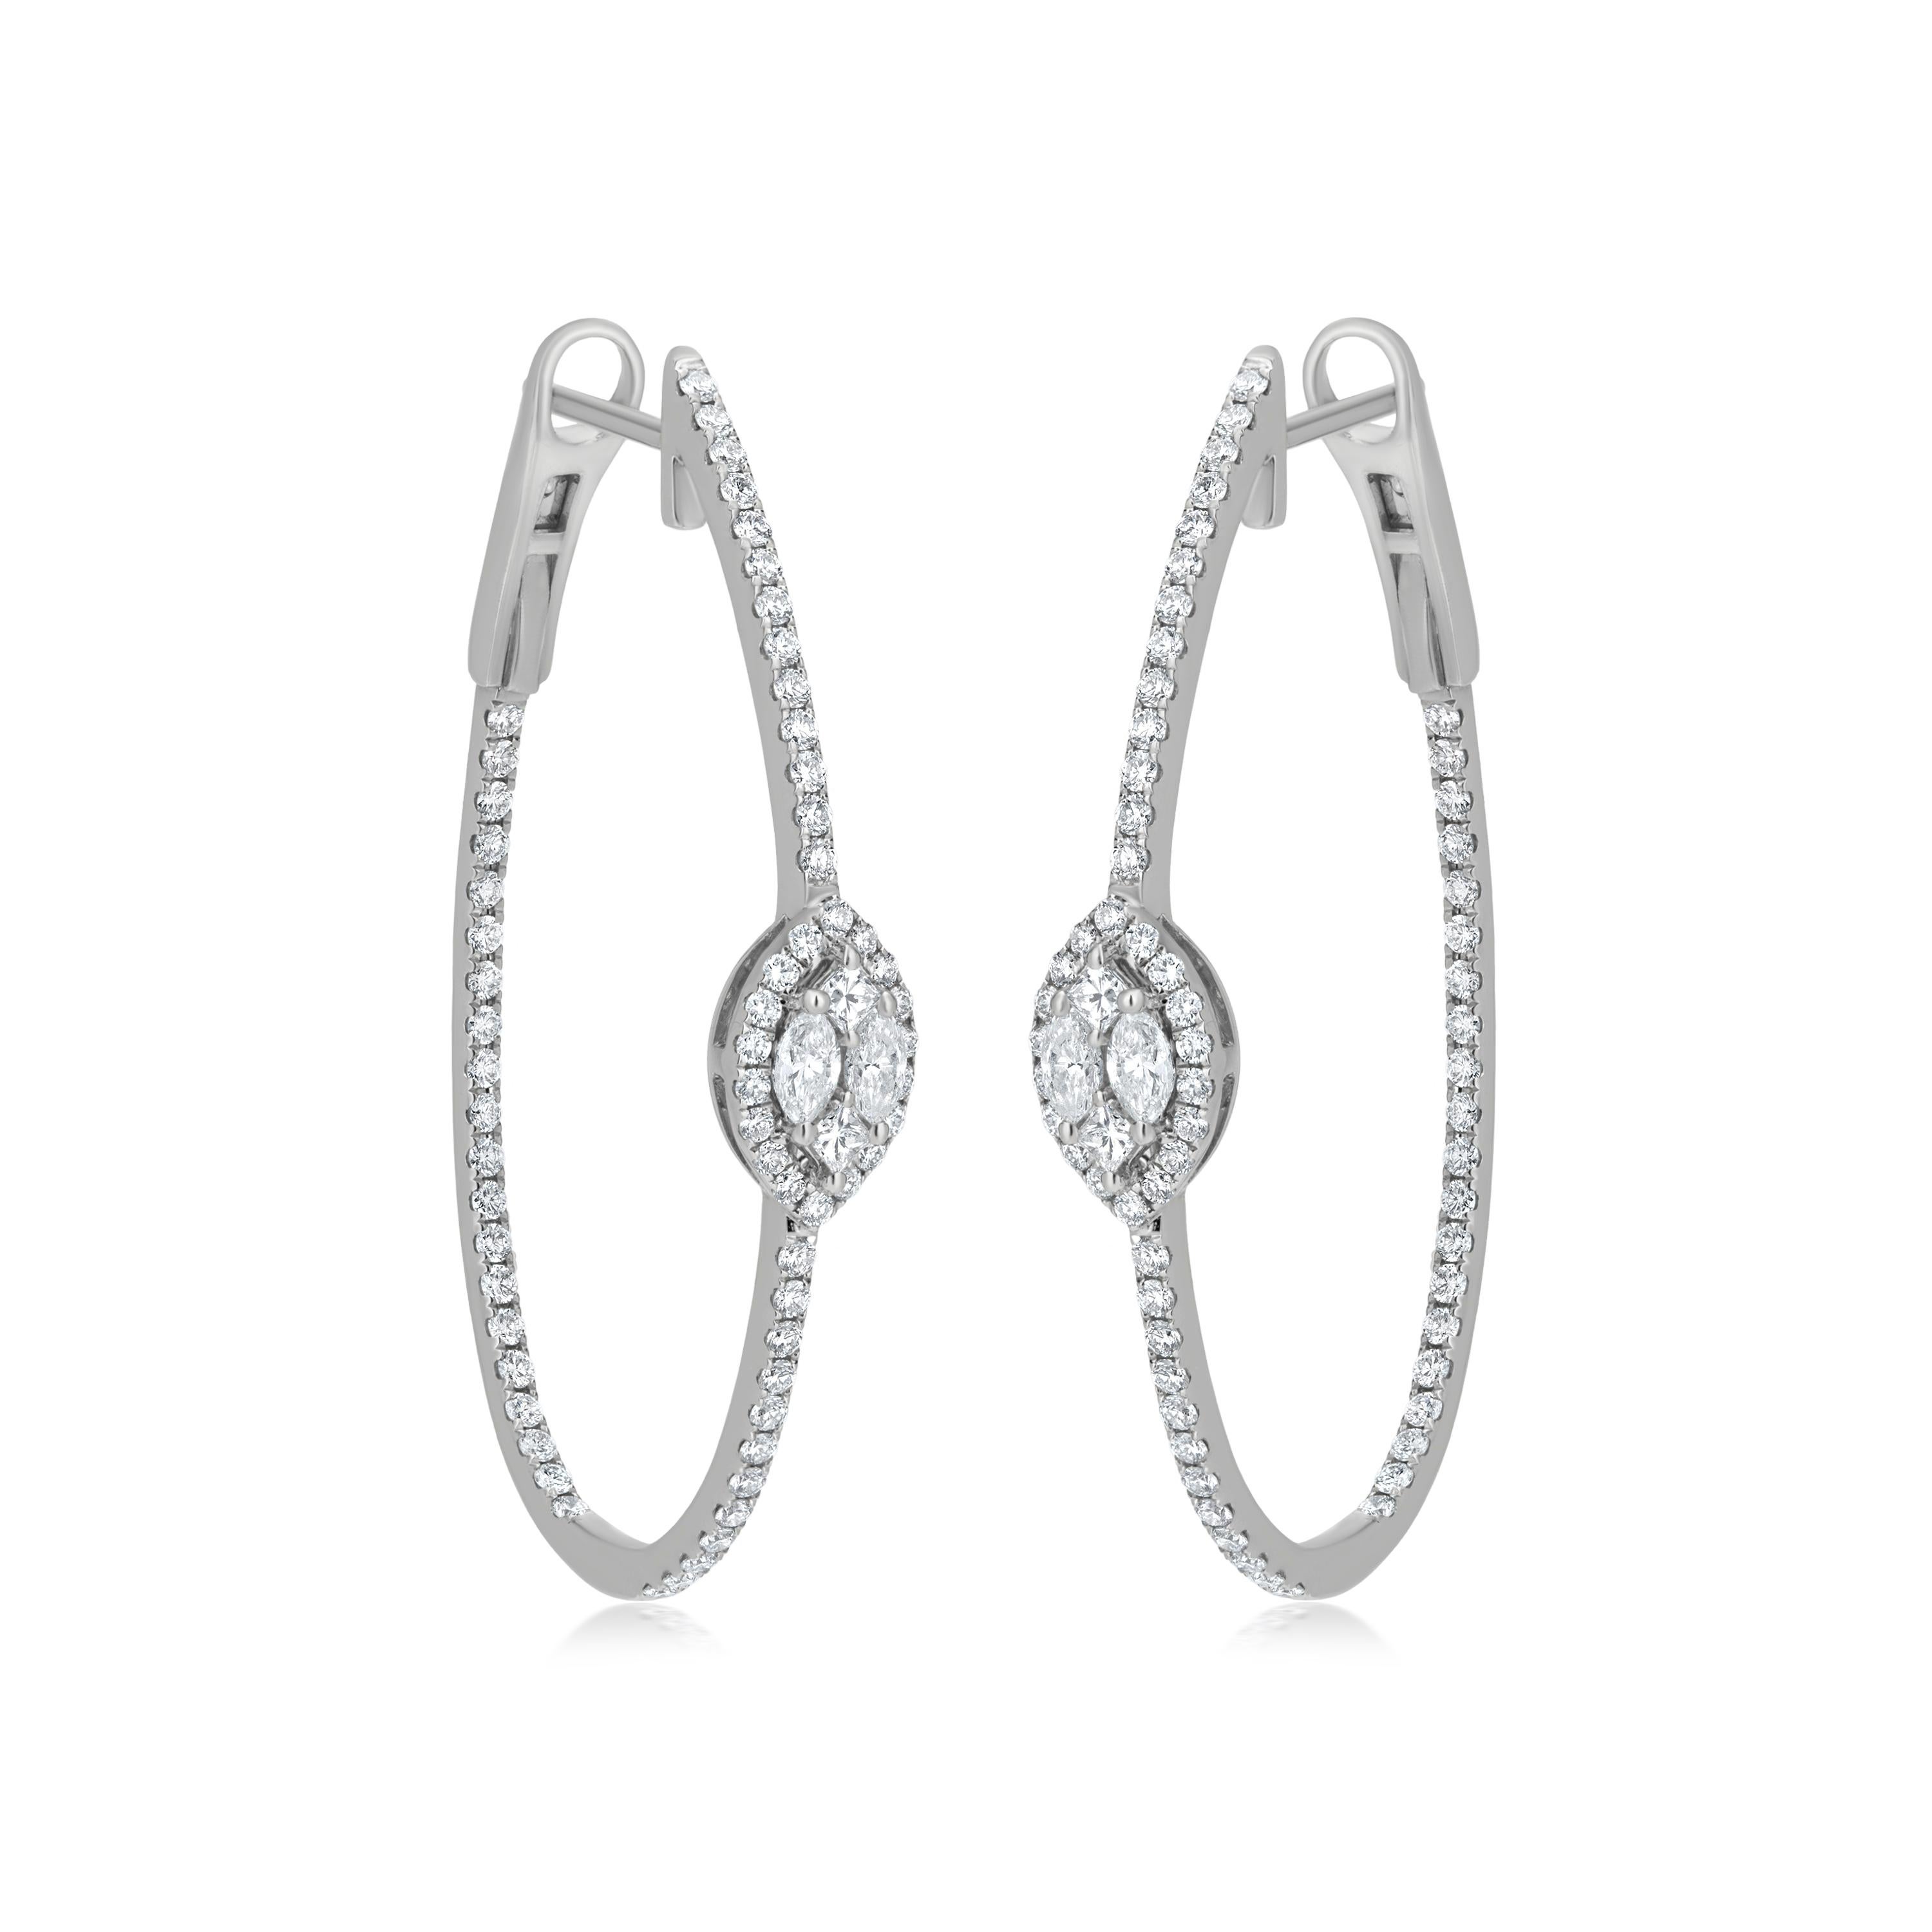 Dazzling combination of diamonds A halo of round diamonds surrounding a marquise diamond pattern on this inside-out hoop earring serves to emphasise it. To give this hoop earring a captivating appearance, pave diamonds are set inside and out. There